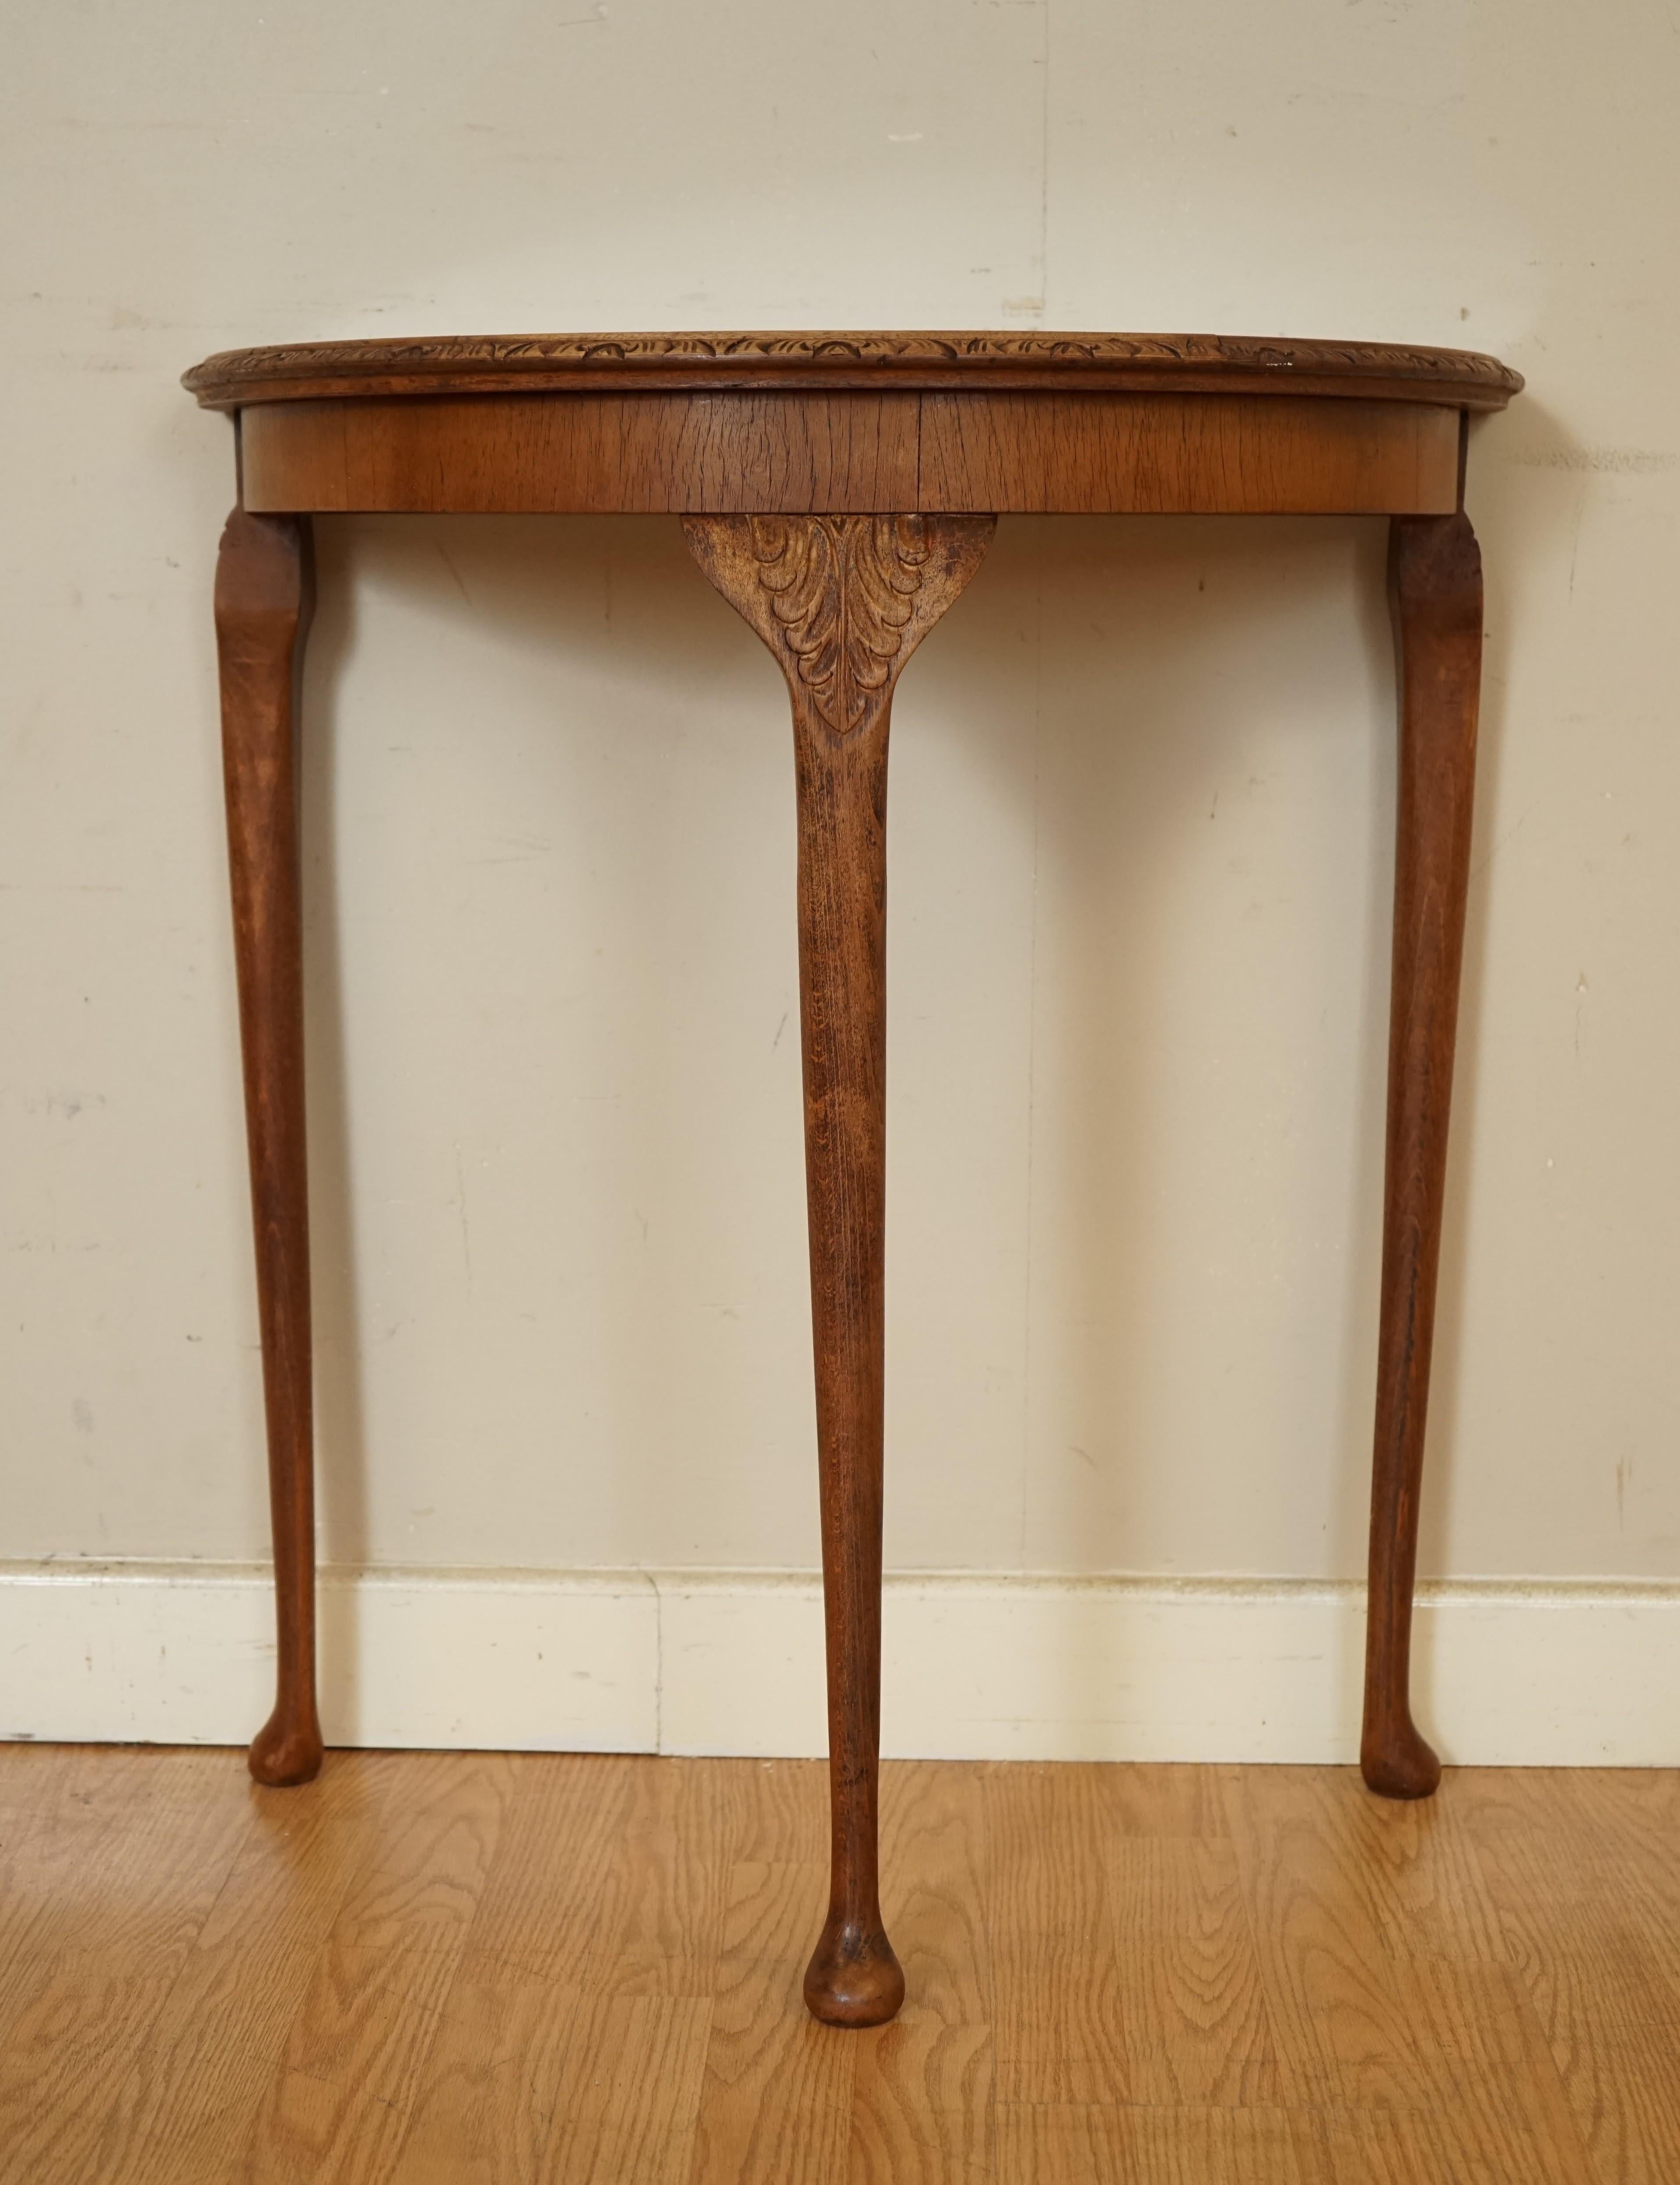 20th Century Burr Walnut Art Deco Bowfront Console Table Plant Stand, circa 1930's